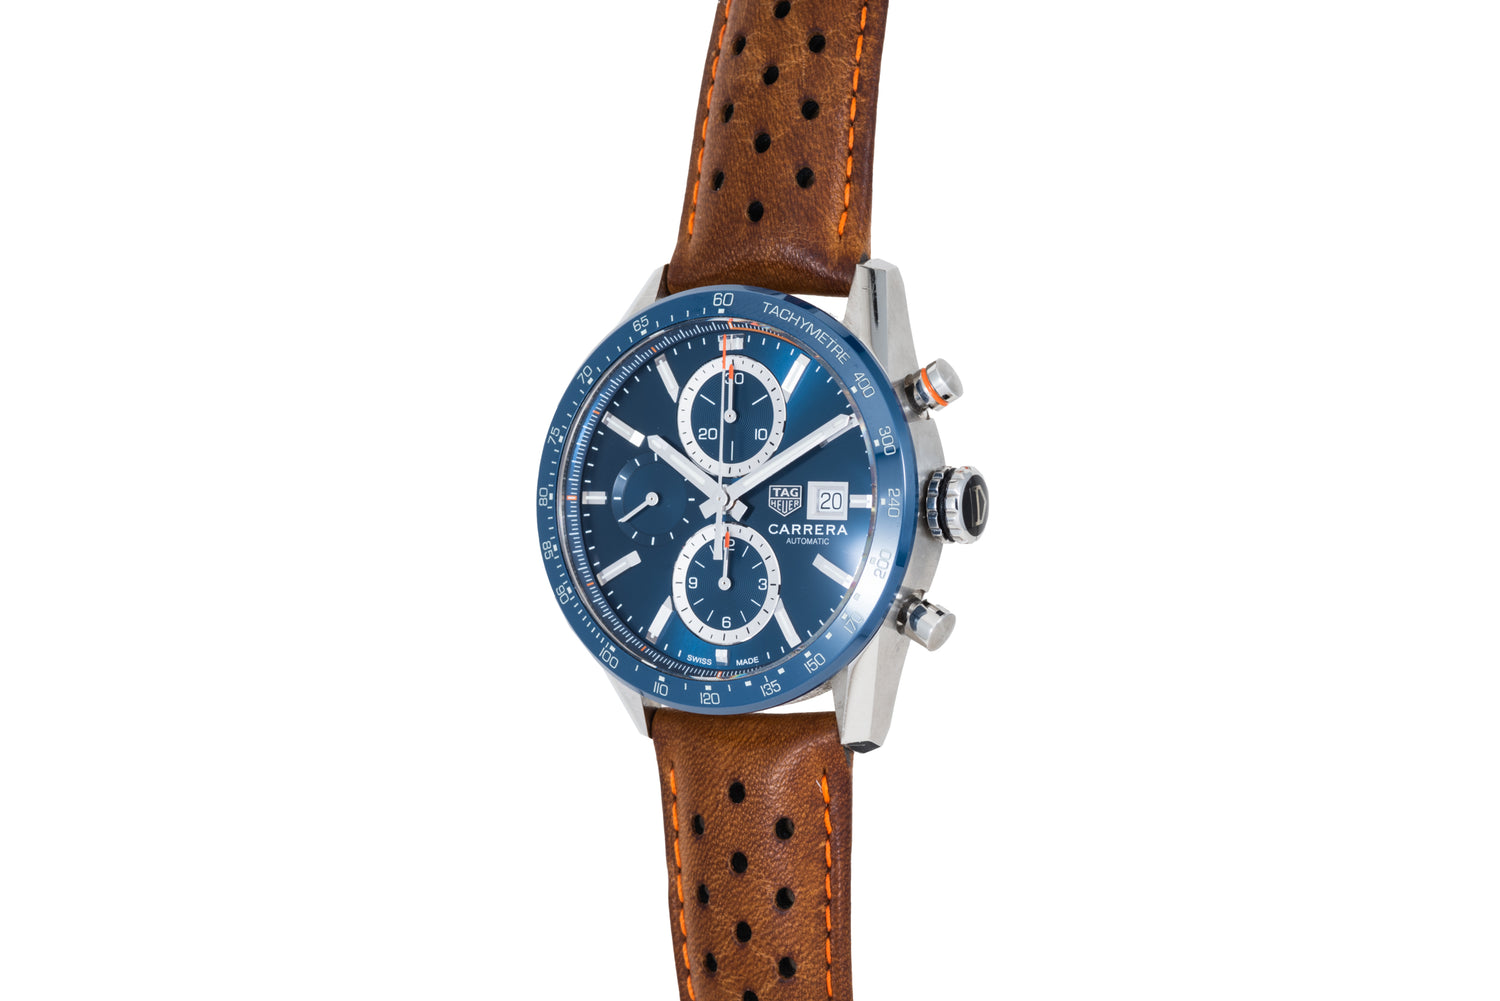 Tag Heuer Carrera Chronograph Automatic Blue Dial Leather Strap Men's Watch Cbn2a1a.fc6537, Size: One Size